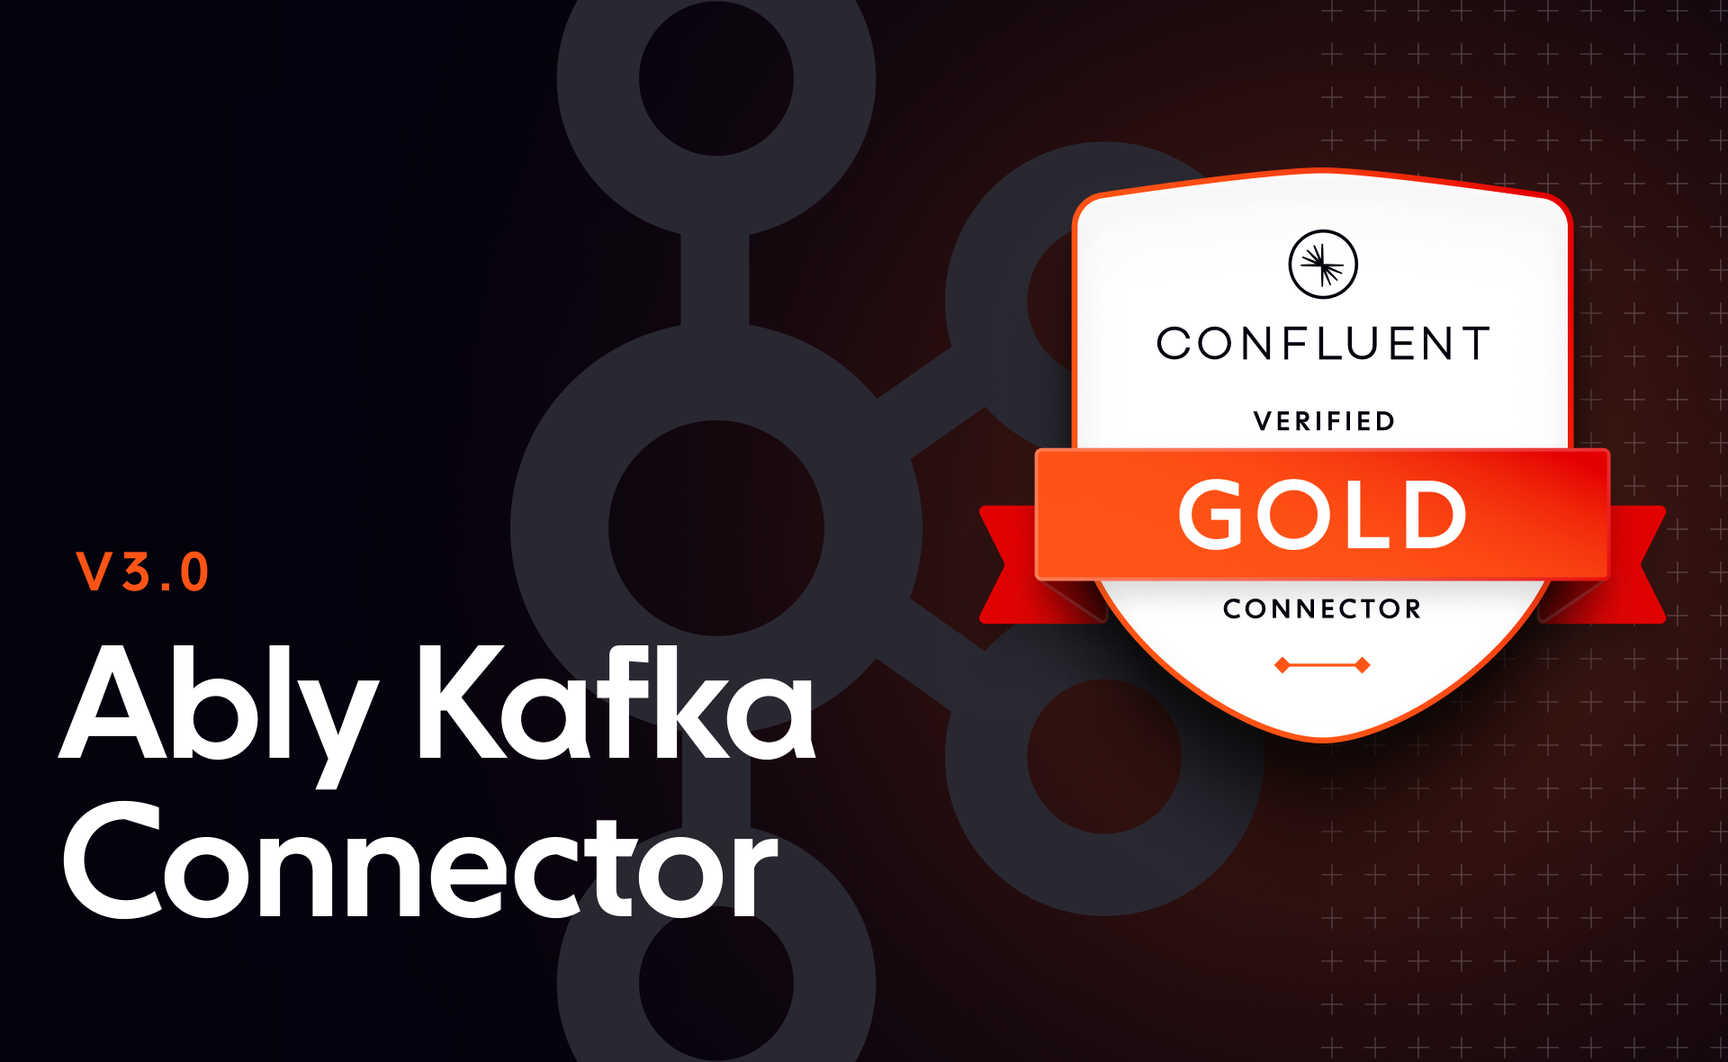 Ably Kafka Connector 3.0: Increased throughput, improved error handling, Confluent Cloud accreditation